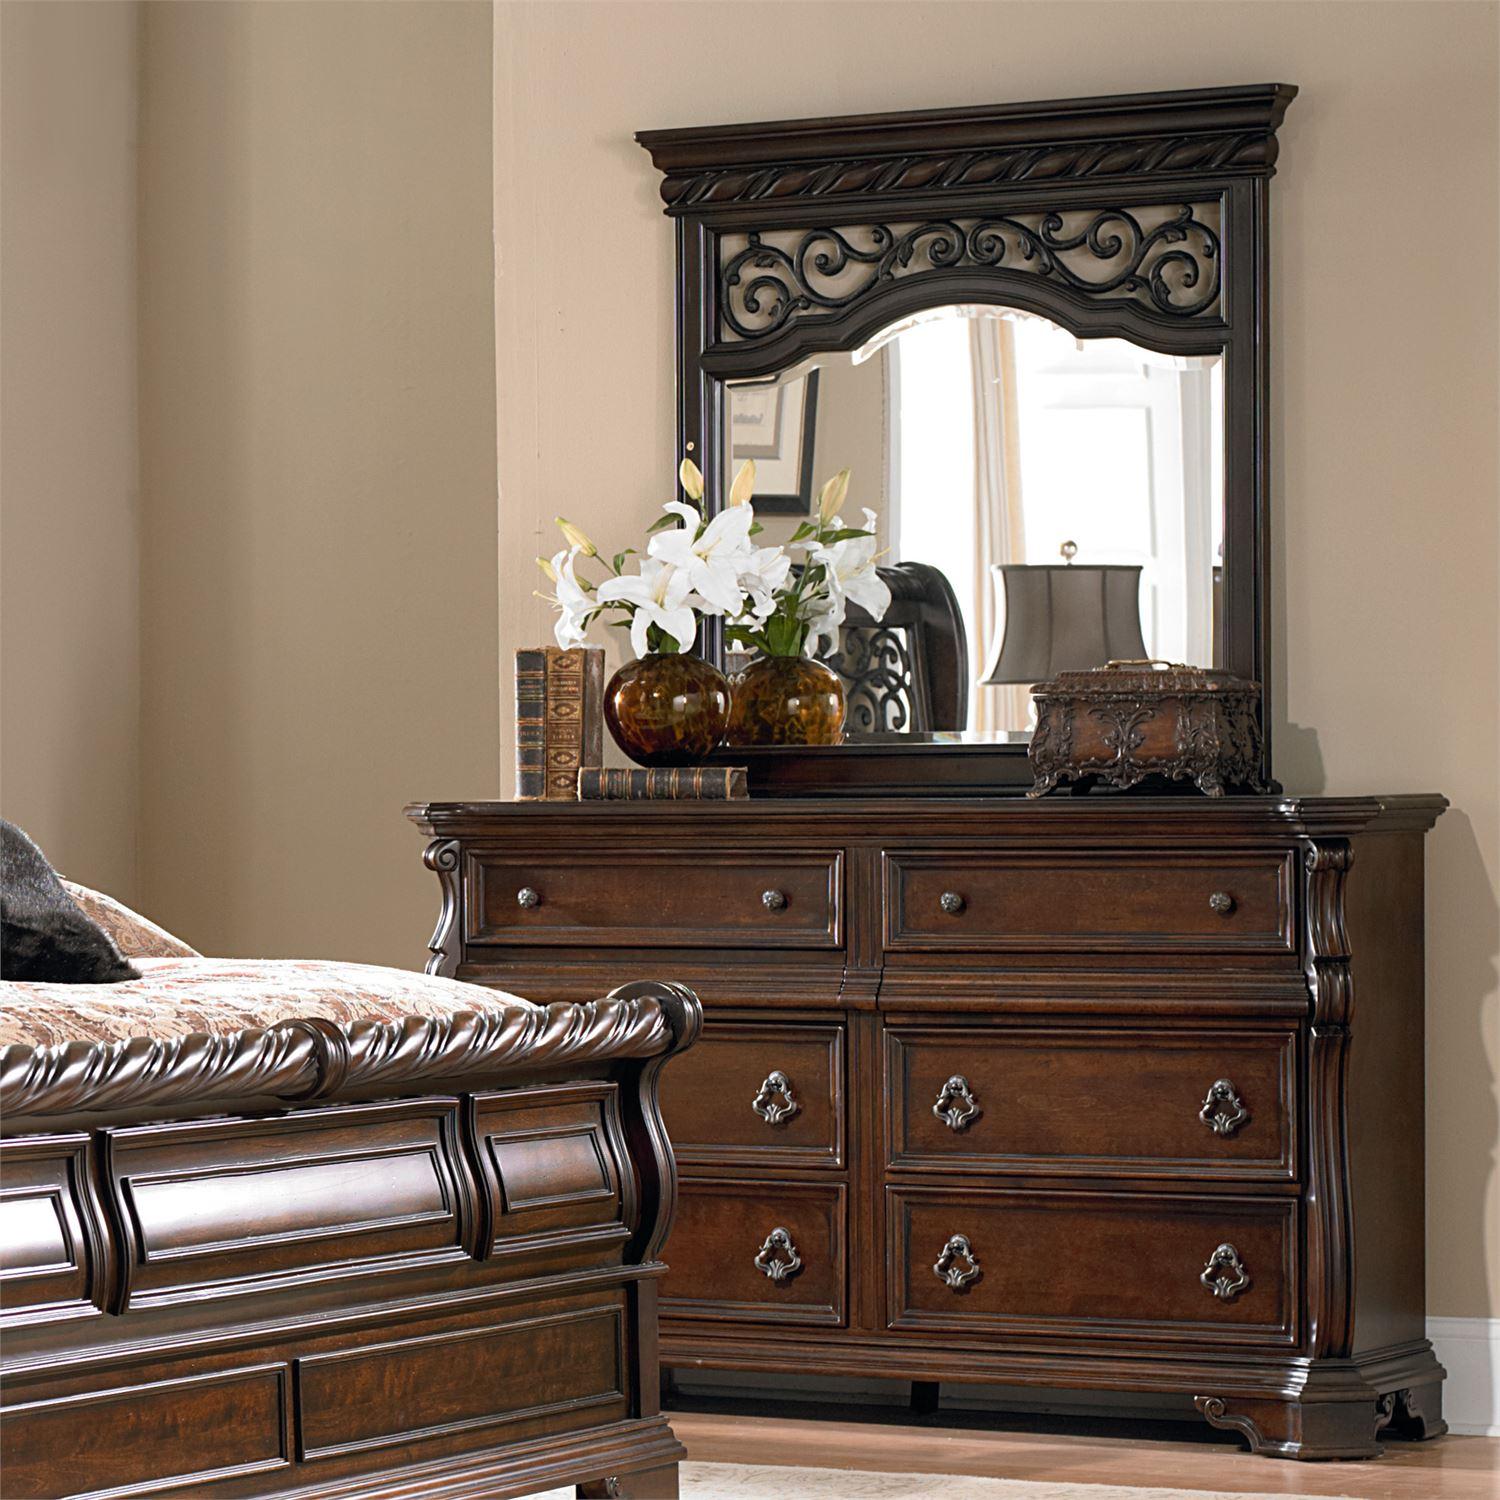 European Traditional Dresser With Mirror Arbor Place 575-BR-DM 575-BR-DM in Brown 